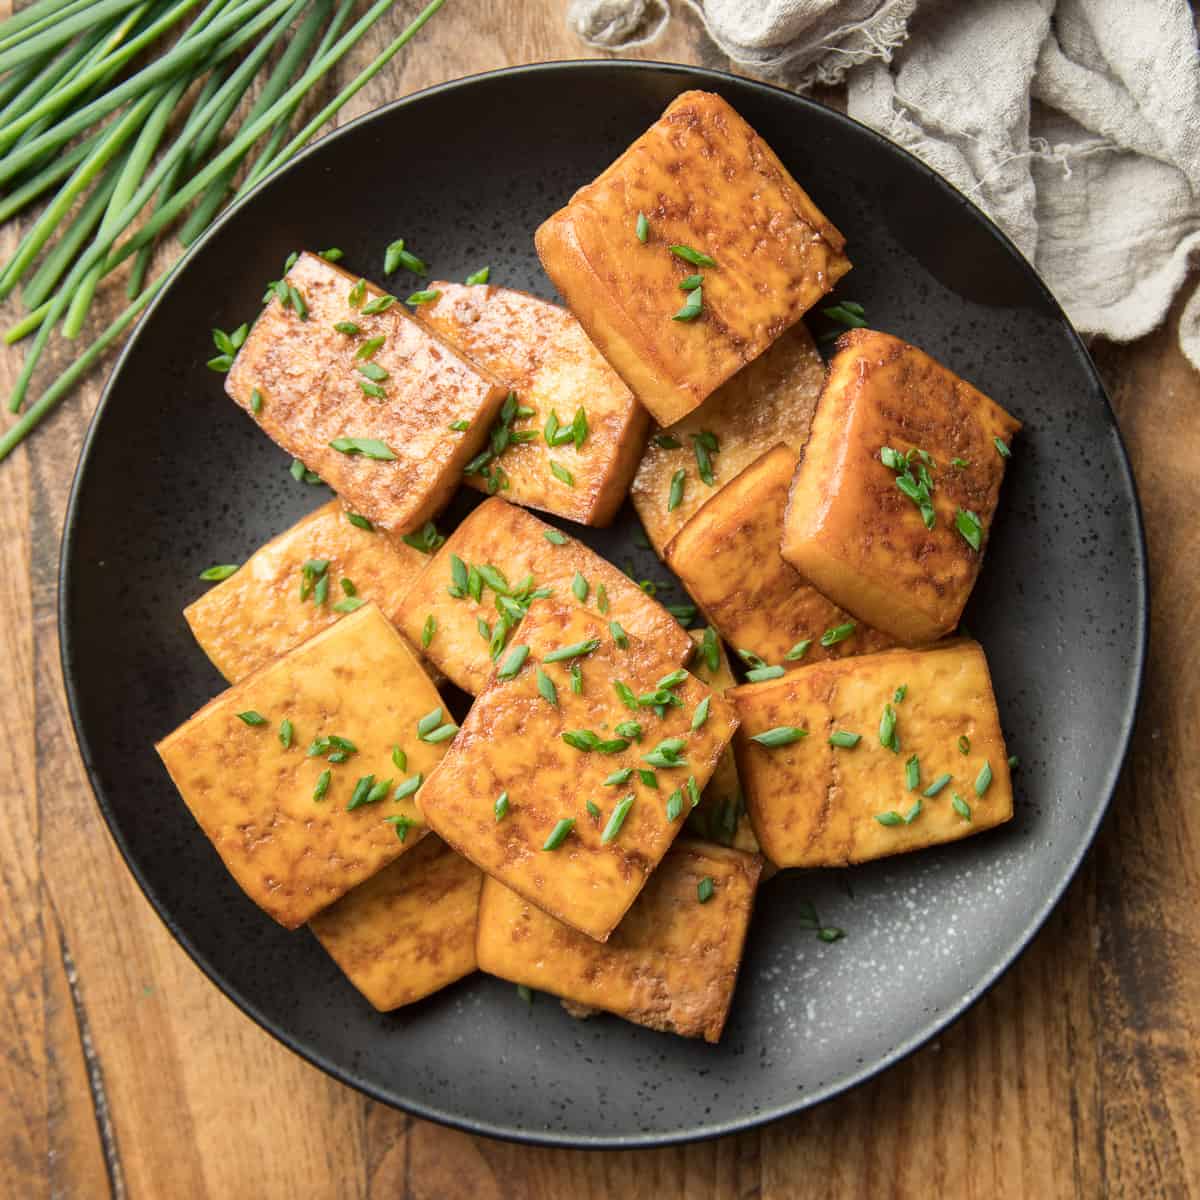 Plate of Smoked Tofu Topped with Chives